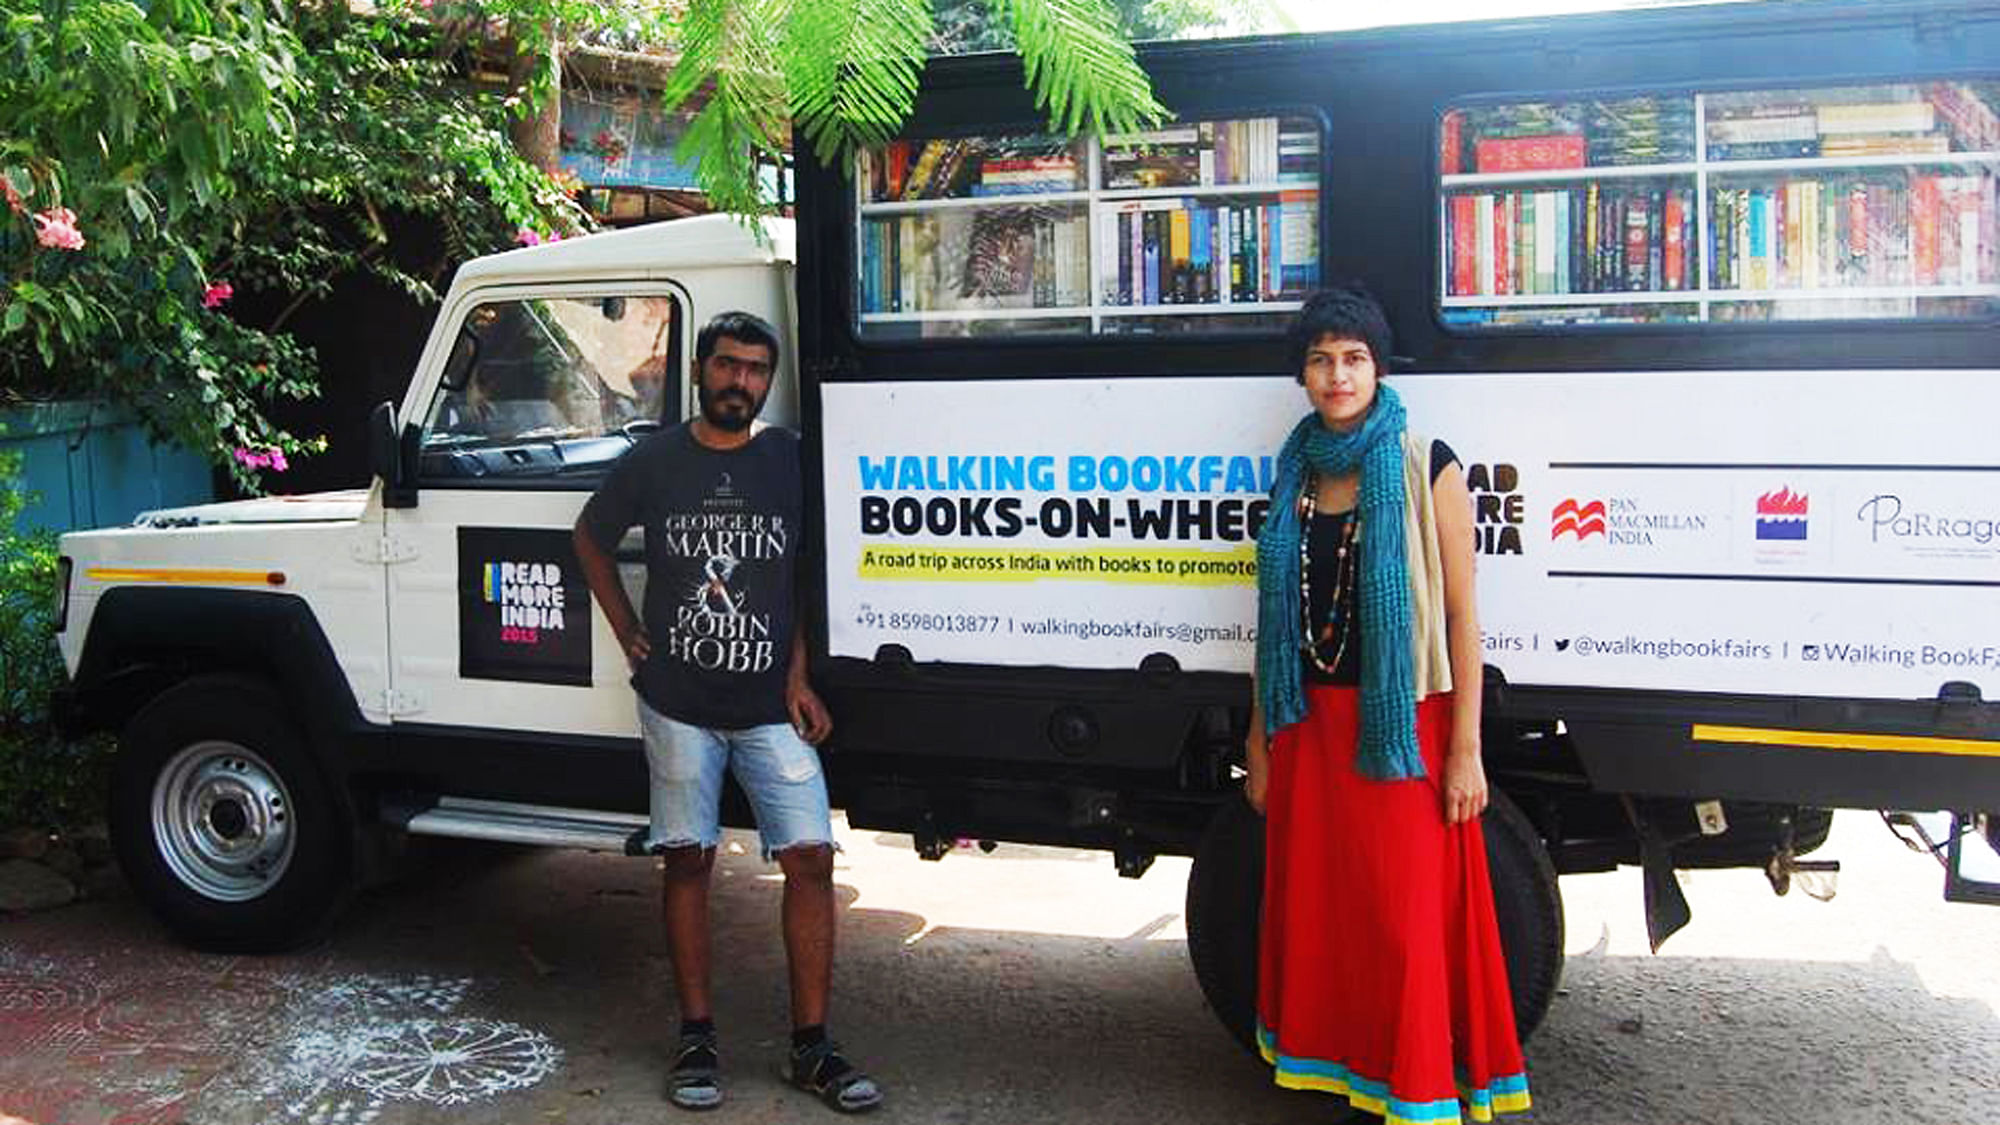 Satabdi Mishra and Akshay Rautaray, the two young Indians who started ‘Walking BookFairs’.&nbsp;(Photo Courtesy: <a href="https://www.facebook.com/Walking-BookFairs-1642636759308197/timeline">Facebook/Walking BookFairs</a>)